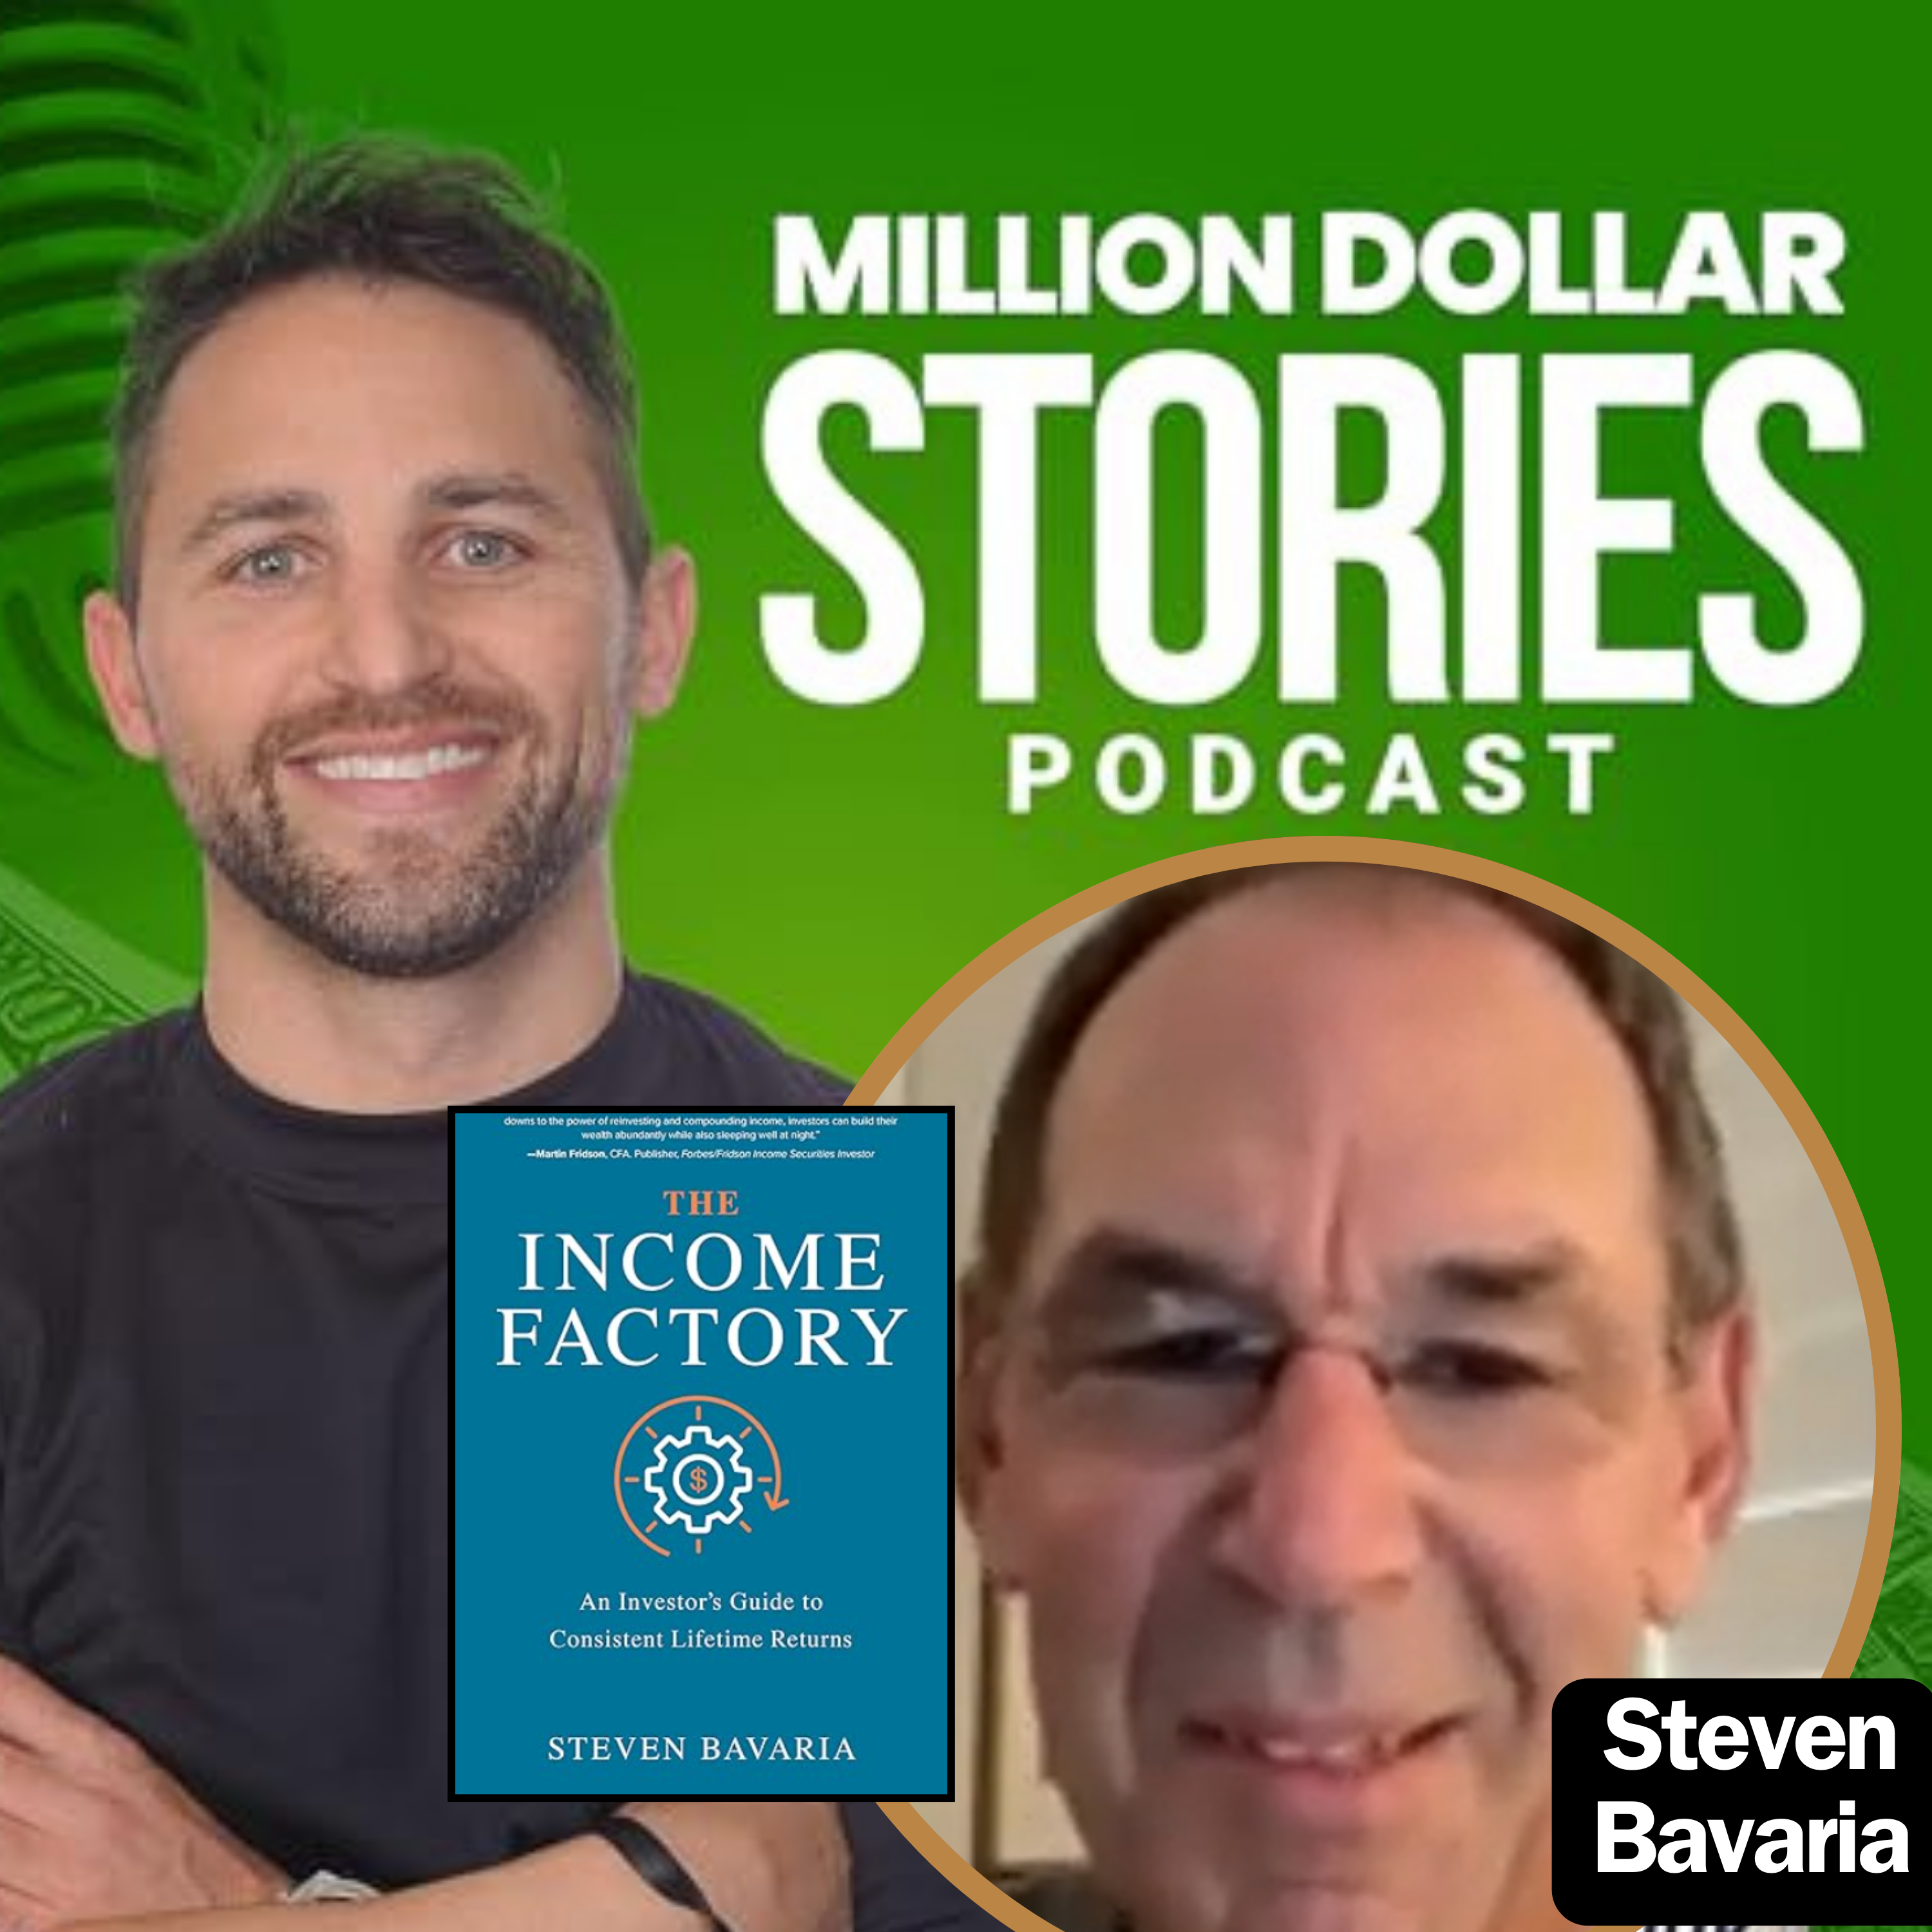 Steven Bavaria – Author of “The Income Factory: An Investor’s Guide to Consistent Lifetime Returns”